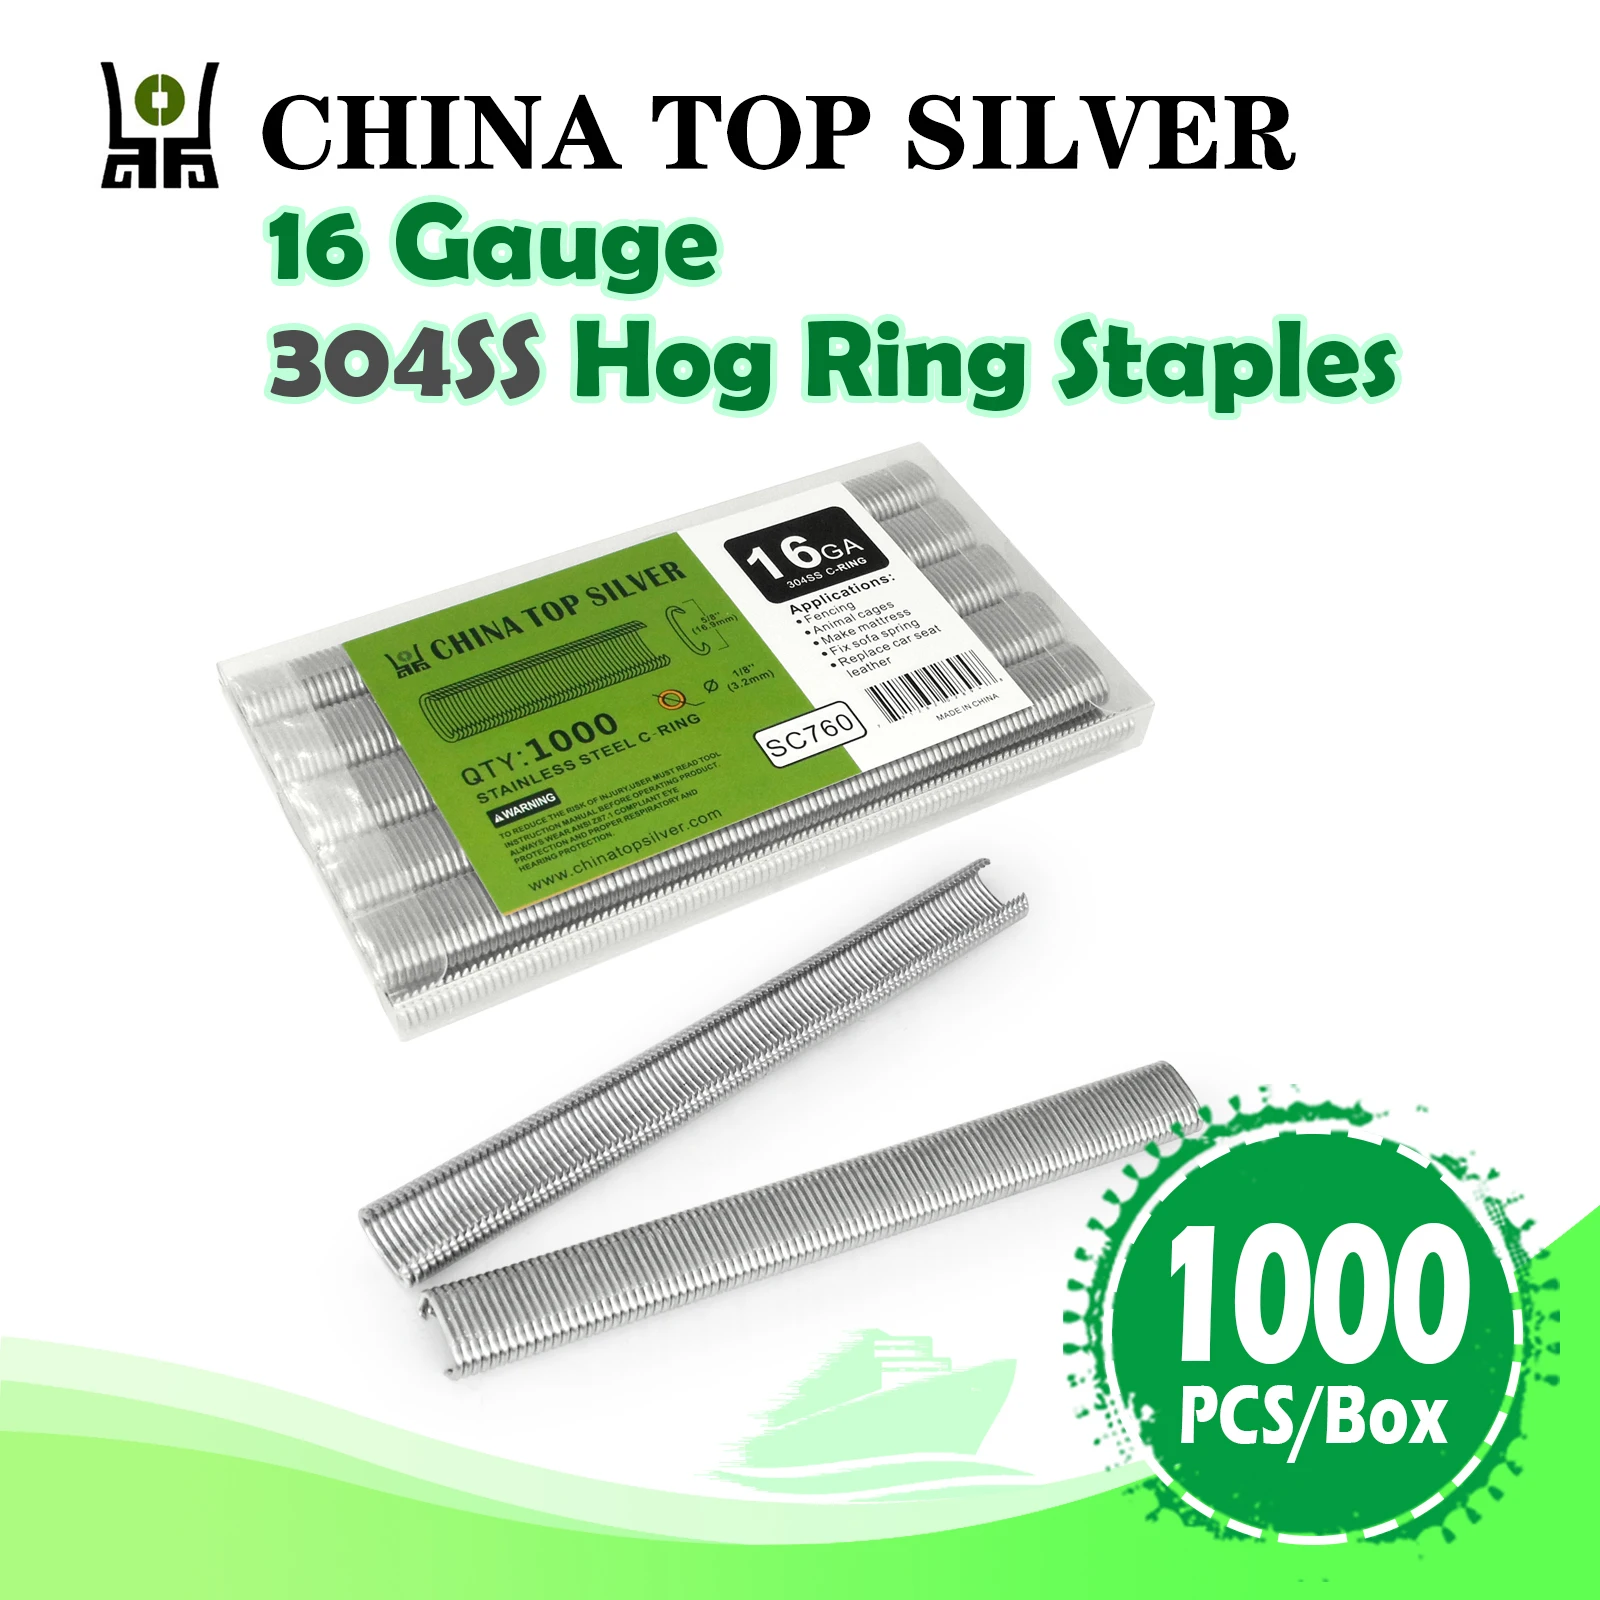 

China-top Silver SC760 16 Gauge 12.5mm Inner Crown 304 Stainless Steel Hog Ring Staples, 1000PCS/Box, for Fencing, Wire Cages